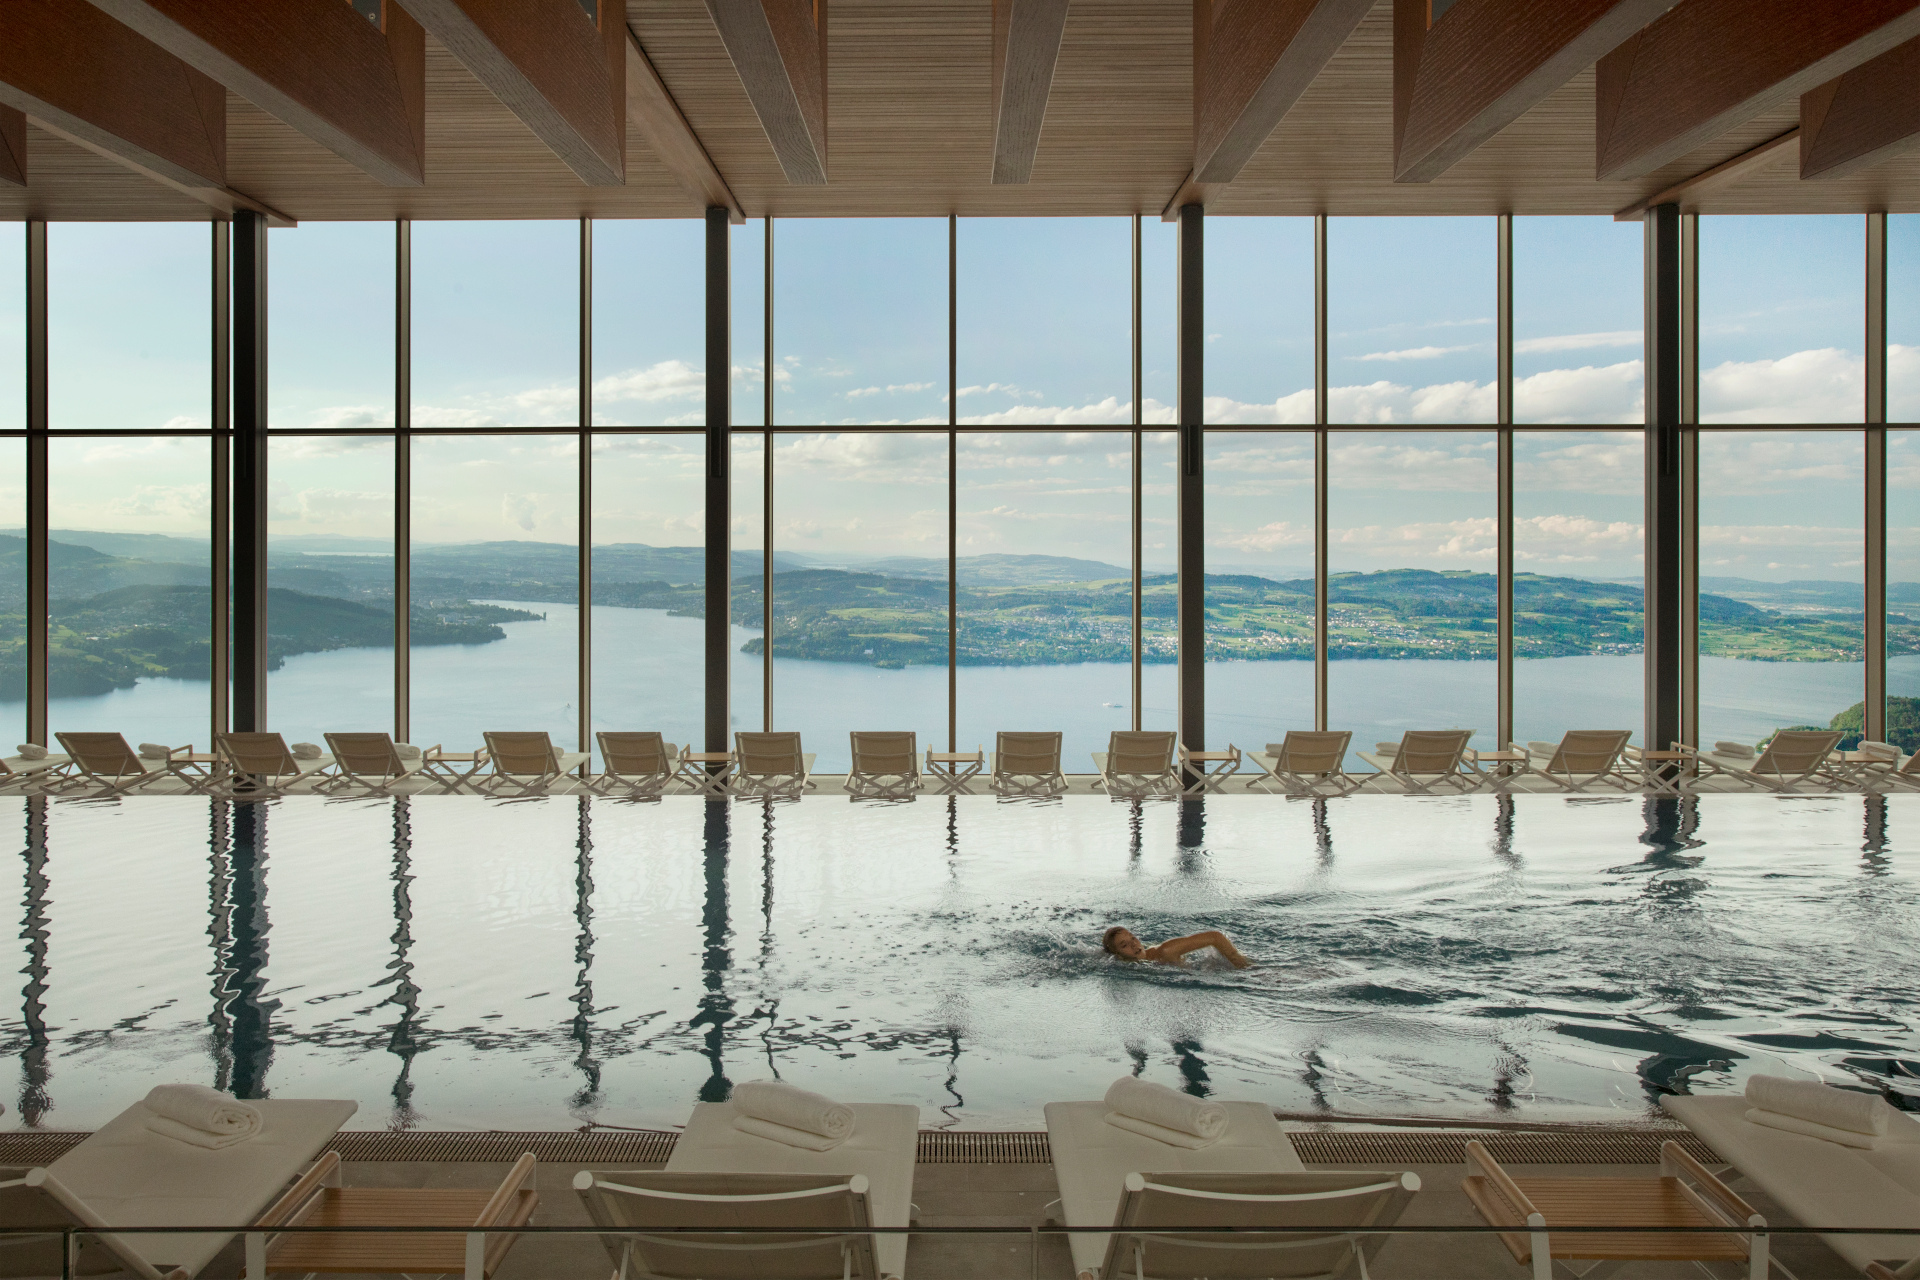 Indoor swimming pool backdropped by floor-to-ceiling windows overlooking lake